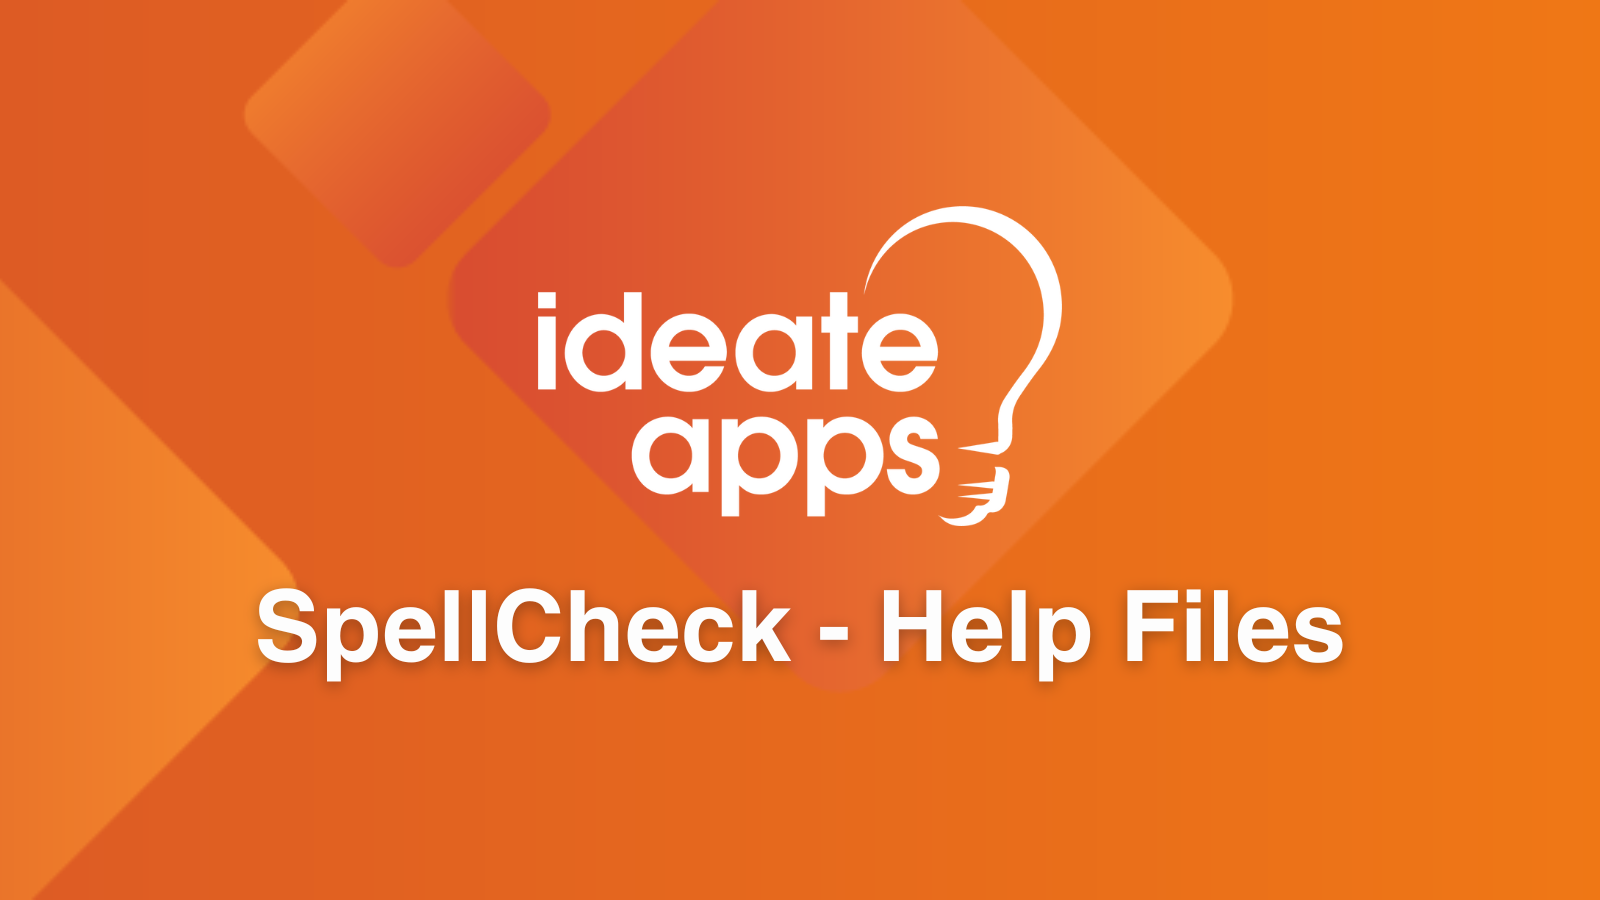 Search IdeateApps SpellCheck Help Files